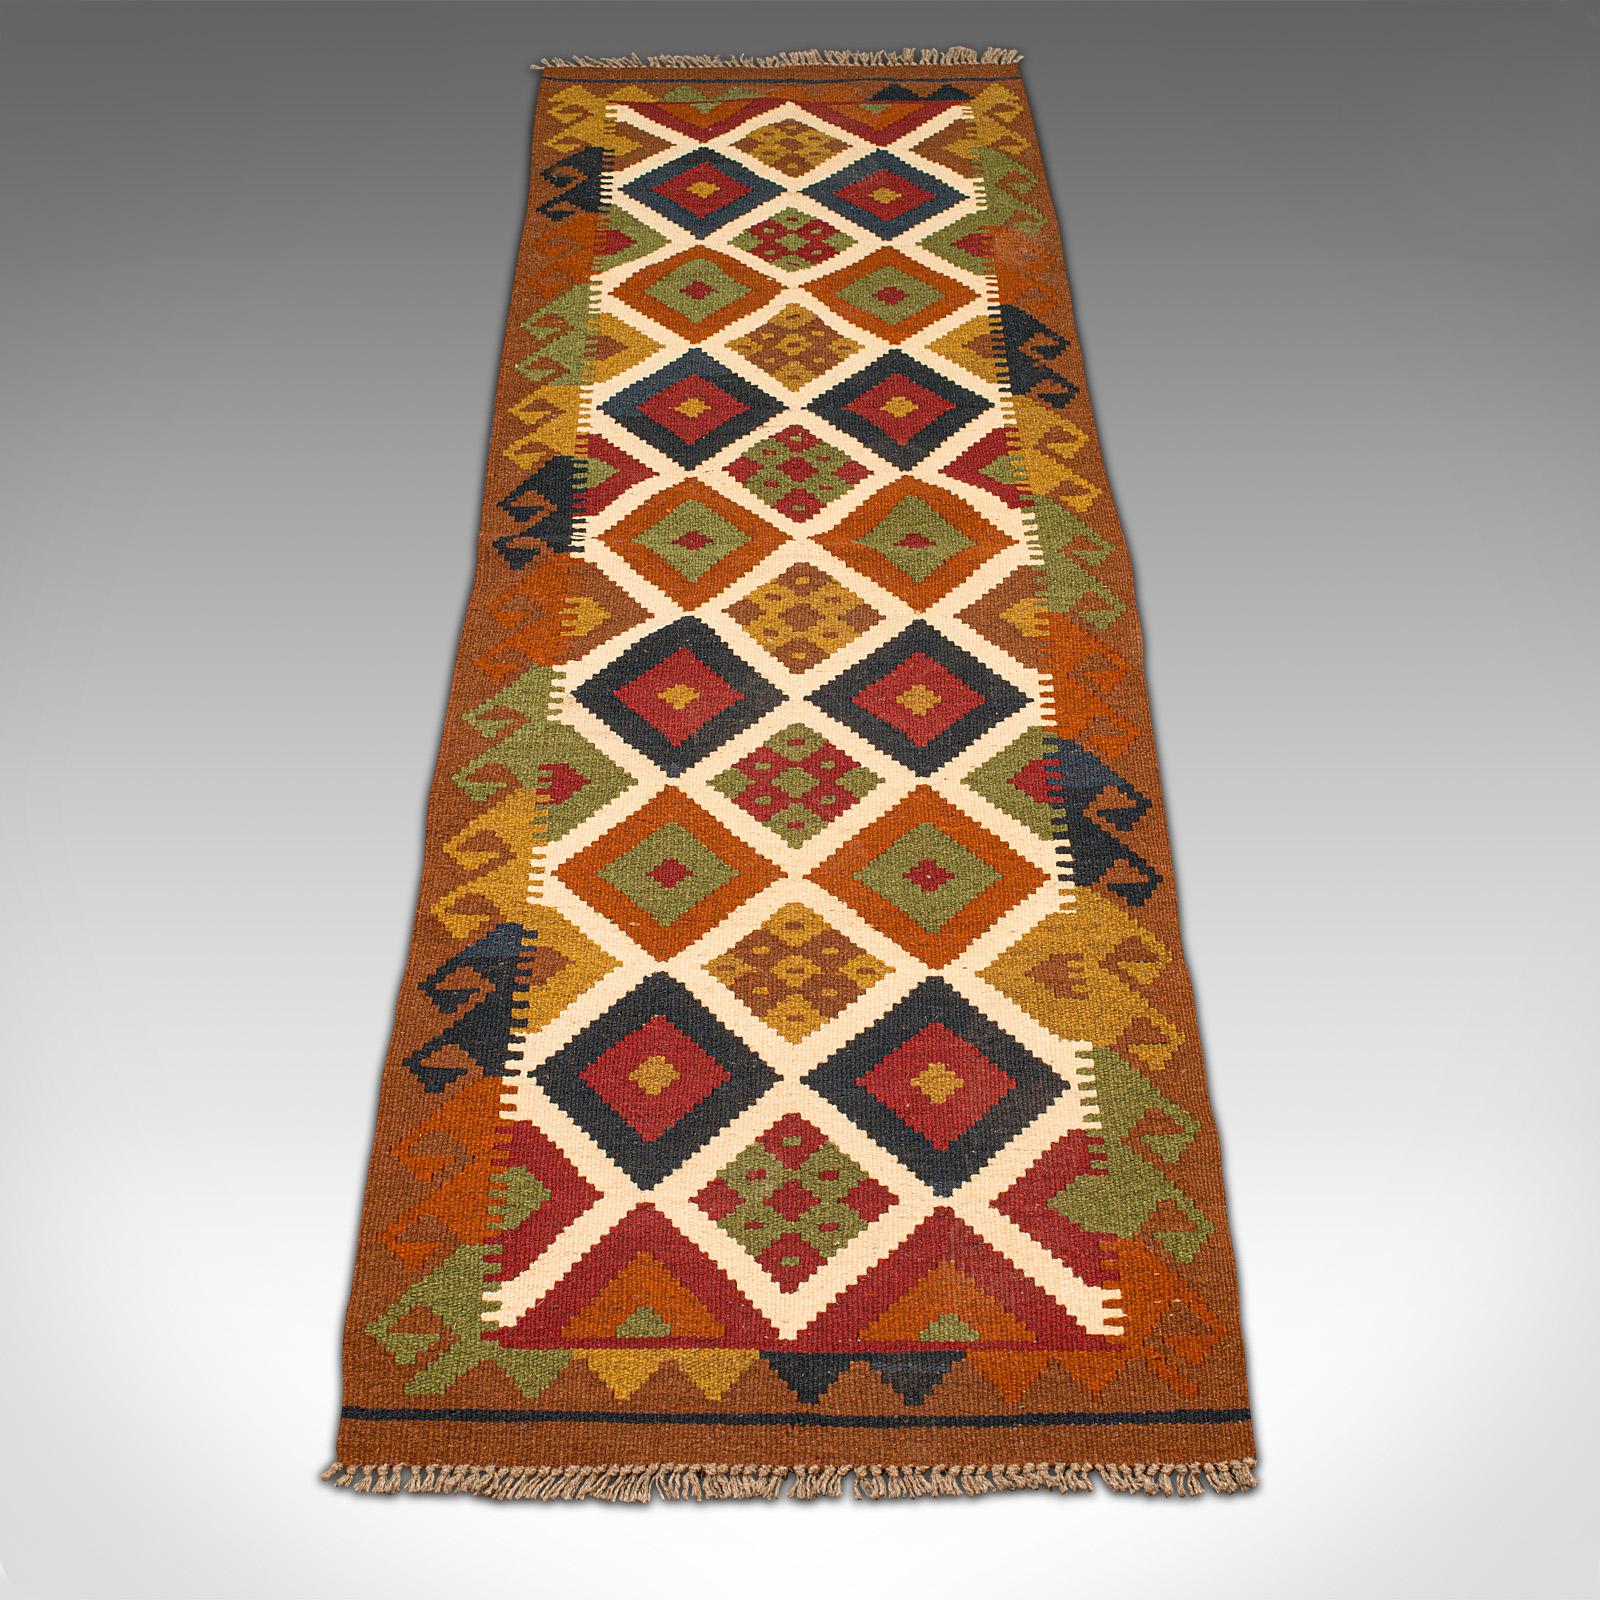 This is a vintage Maimana Kilim hall runner. A Caucasian, decorative hallway carpet or rug, dating to the late 20th century, circa 1990.

Usefully sized runner at 61cm (24'') x 200cm (78.75'')
Displaying a desirable aged patina and in good